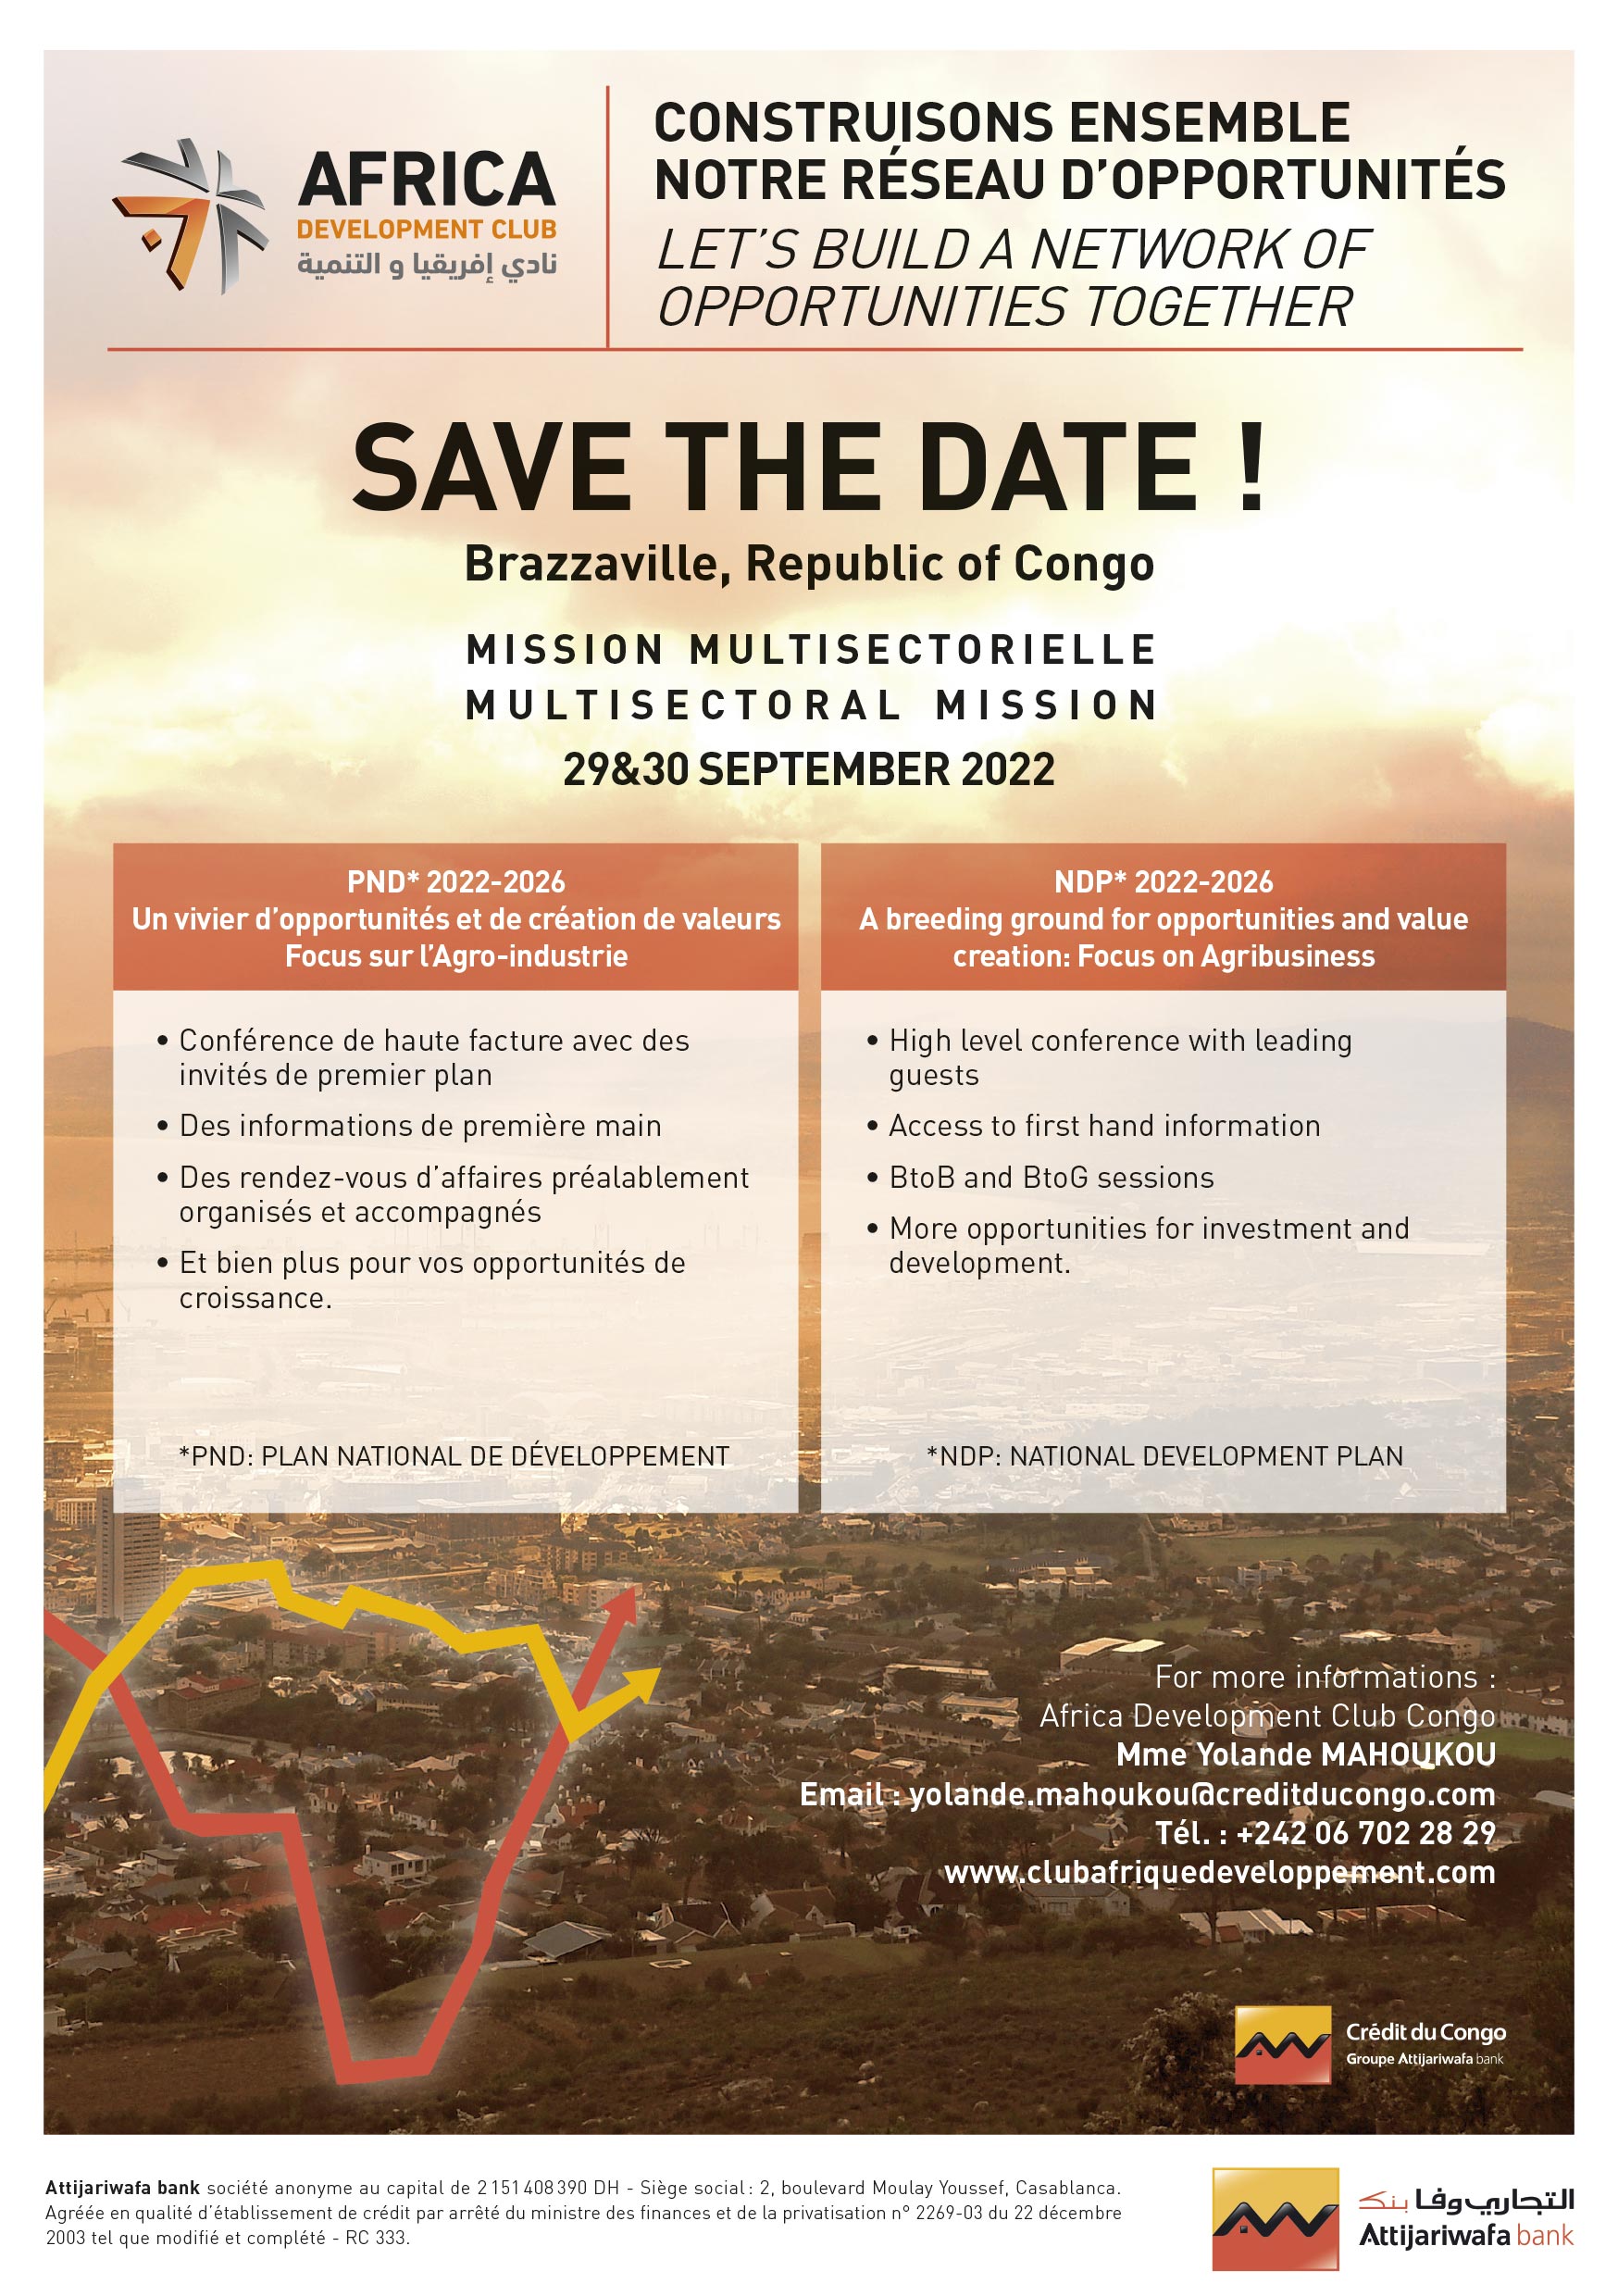 Save the Date ! Mission Multisectorielle Congo 